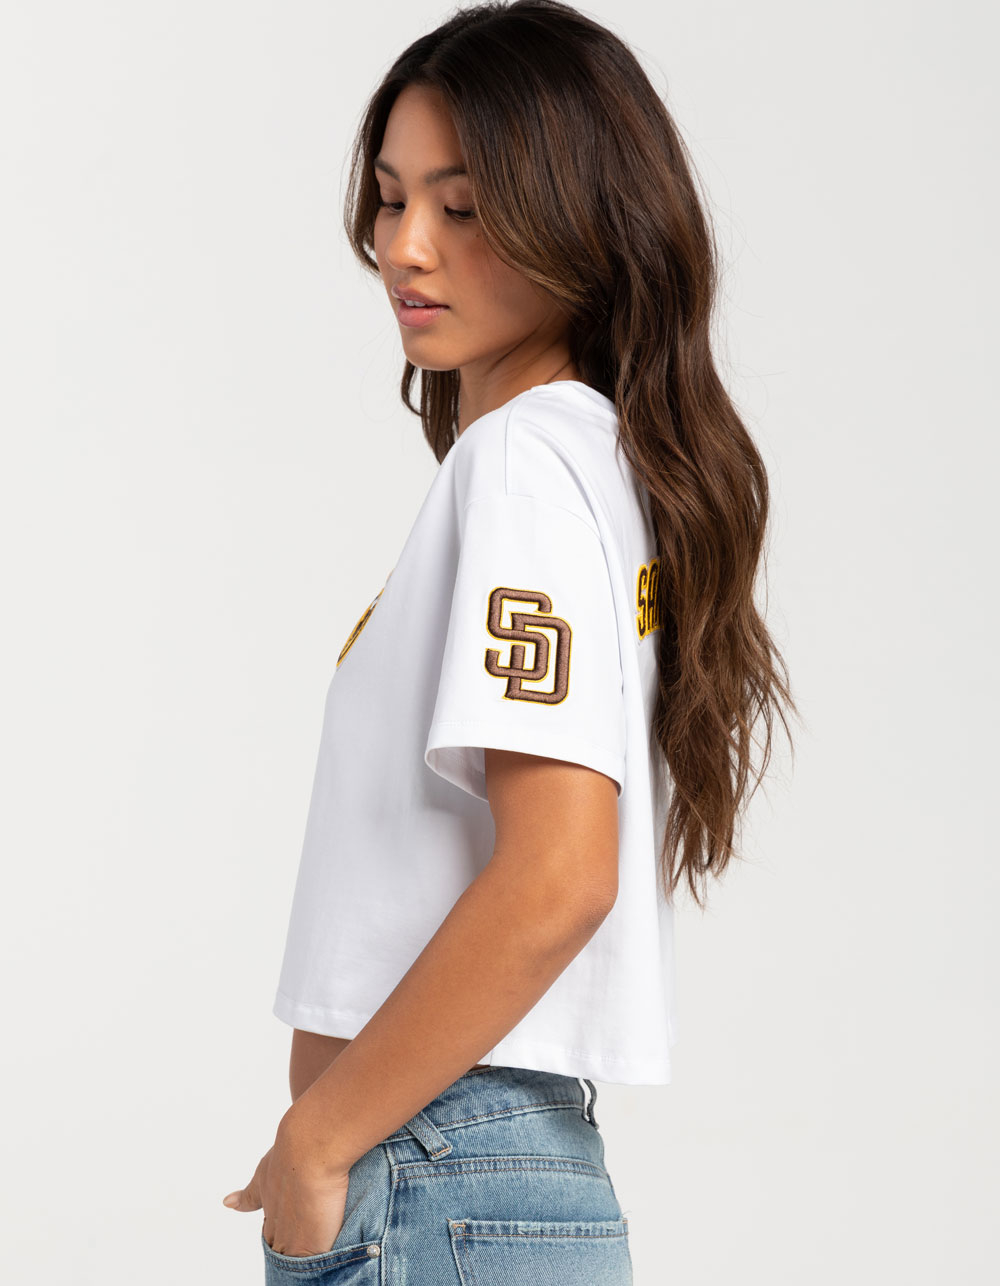 Women's San Diego Padres Gear, Womens Padres Apparel, Ladies Padres Outfits